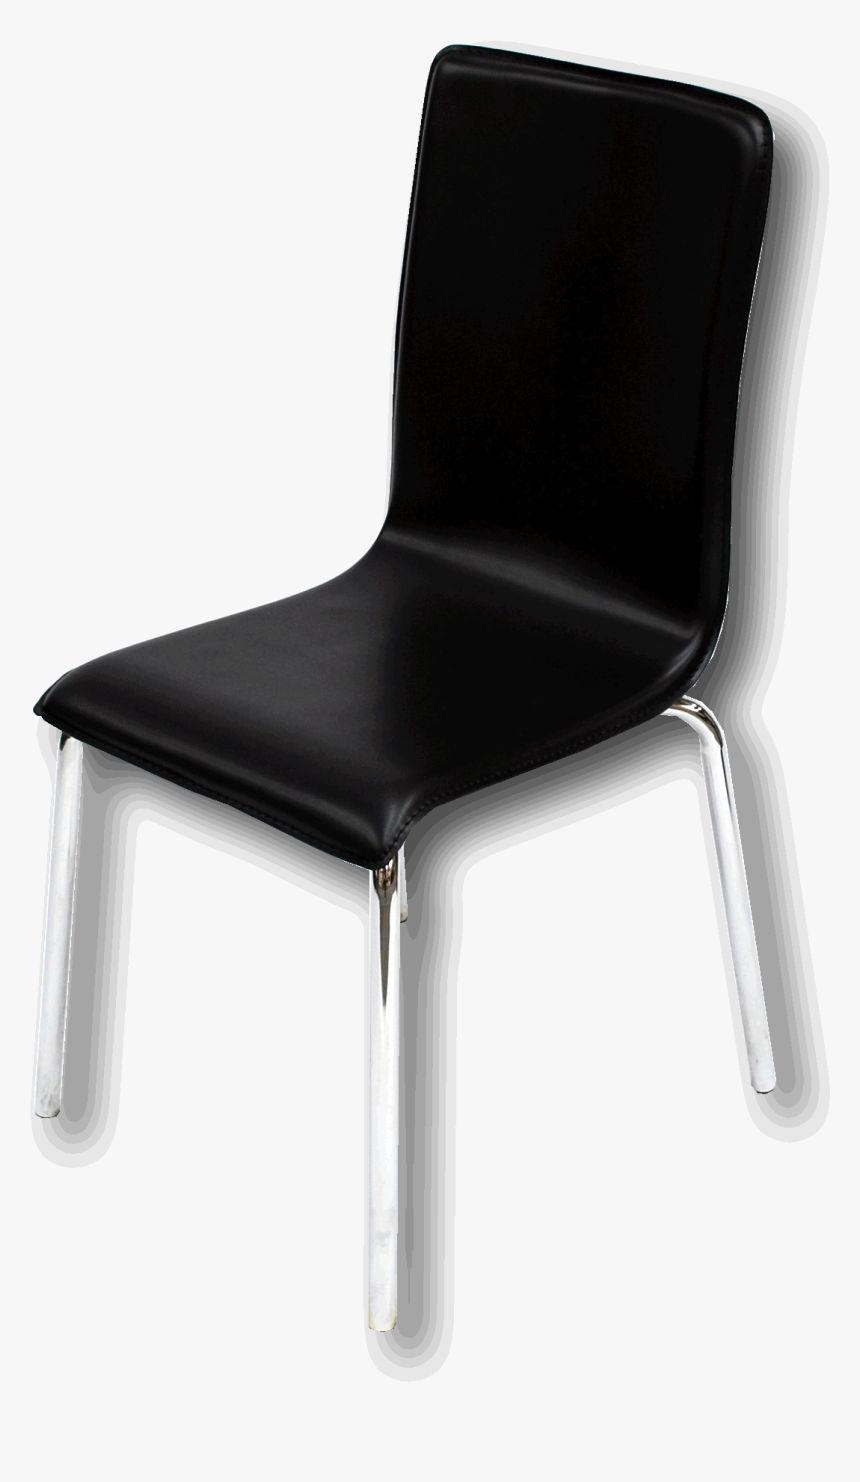 Aesthetic Chair Png - Transparent Chair Png Hd, Png Download, Free Download